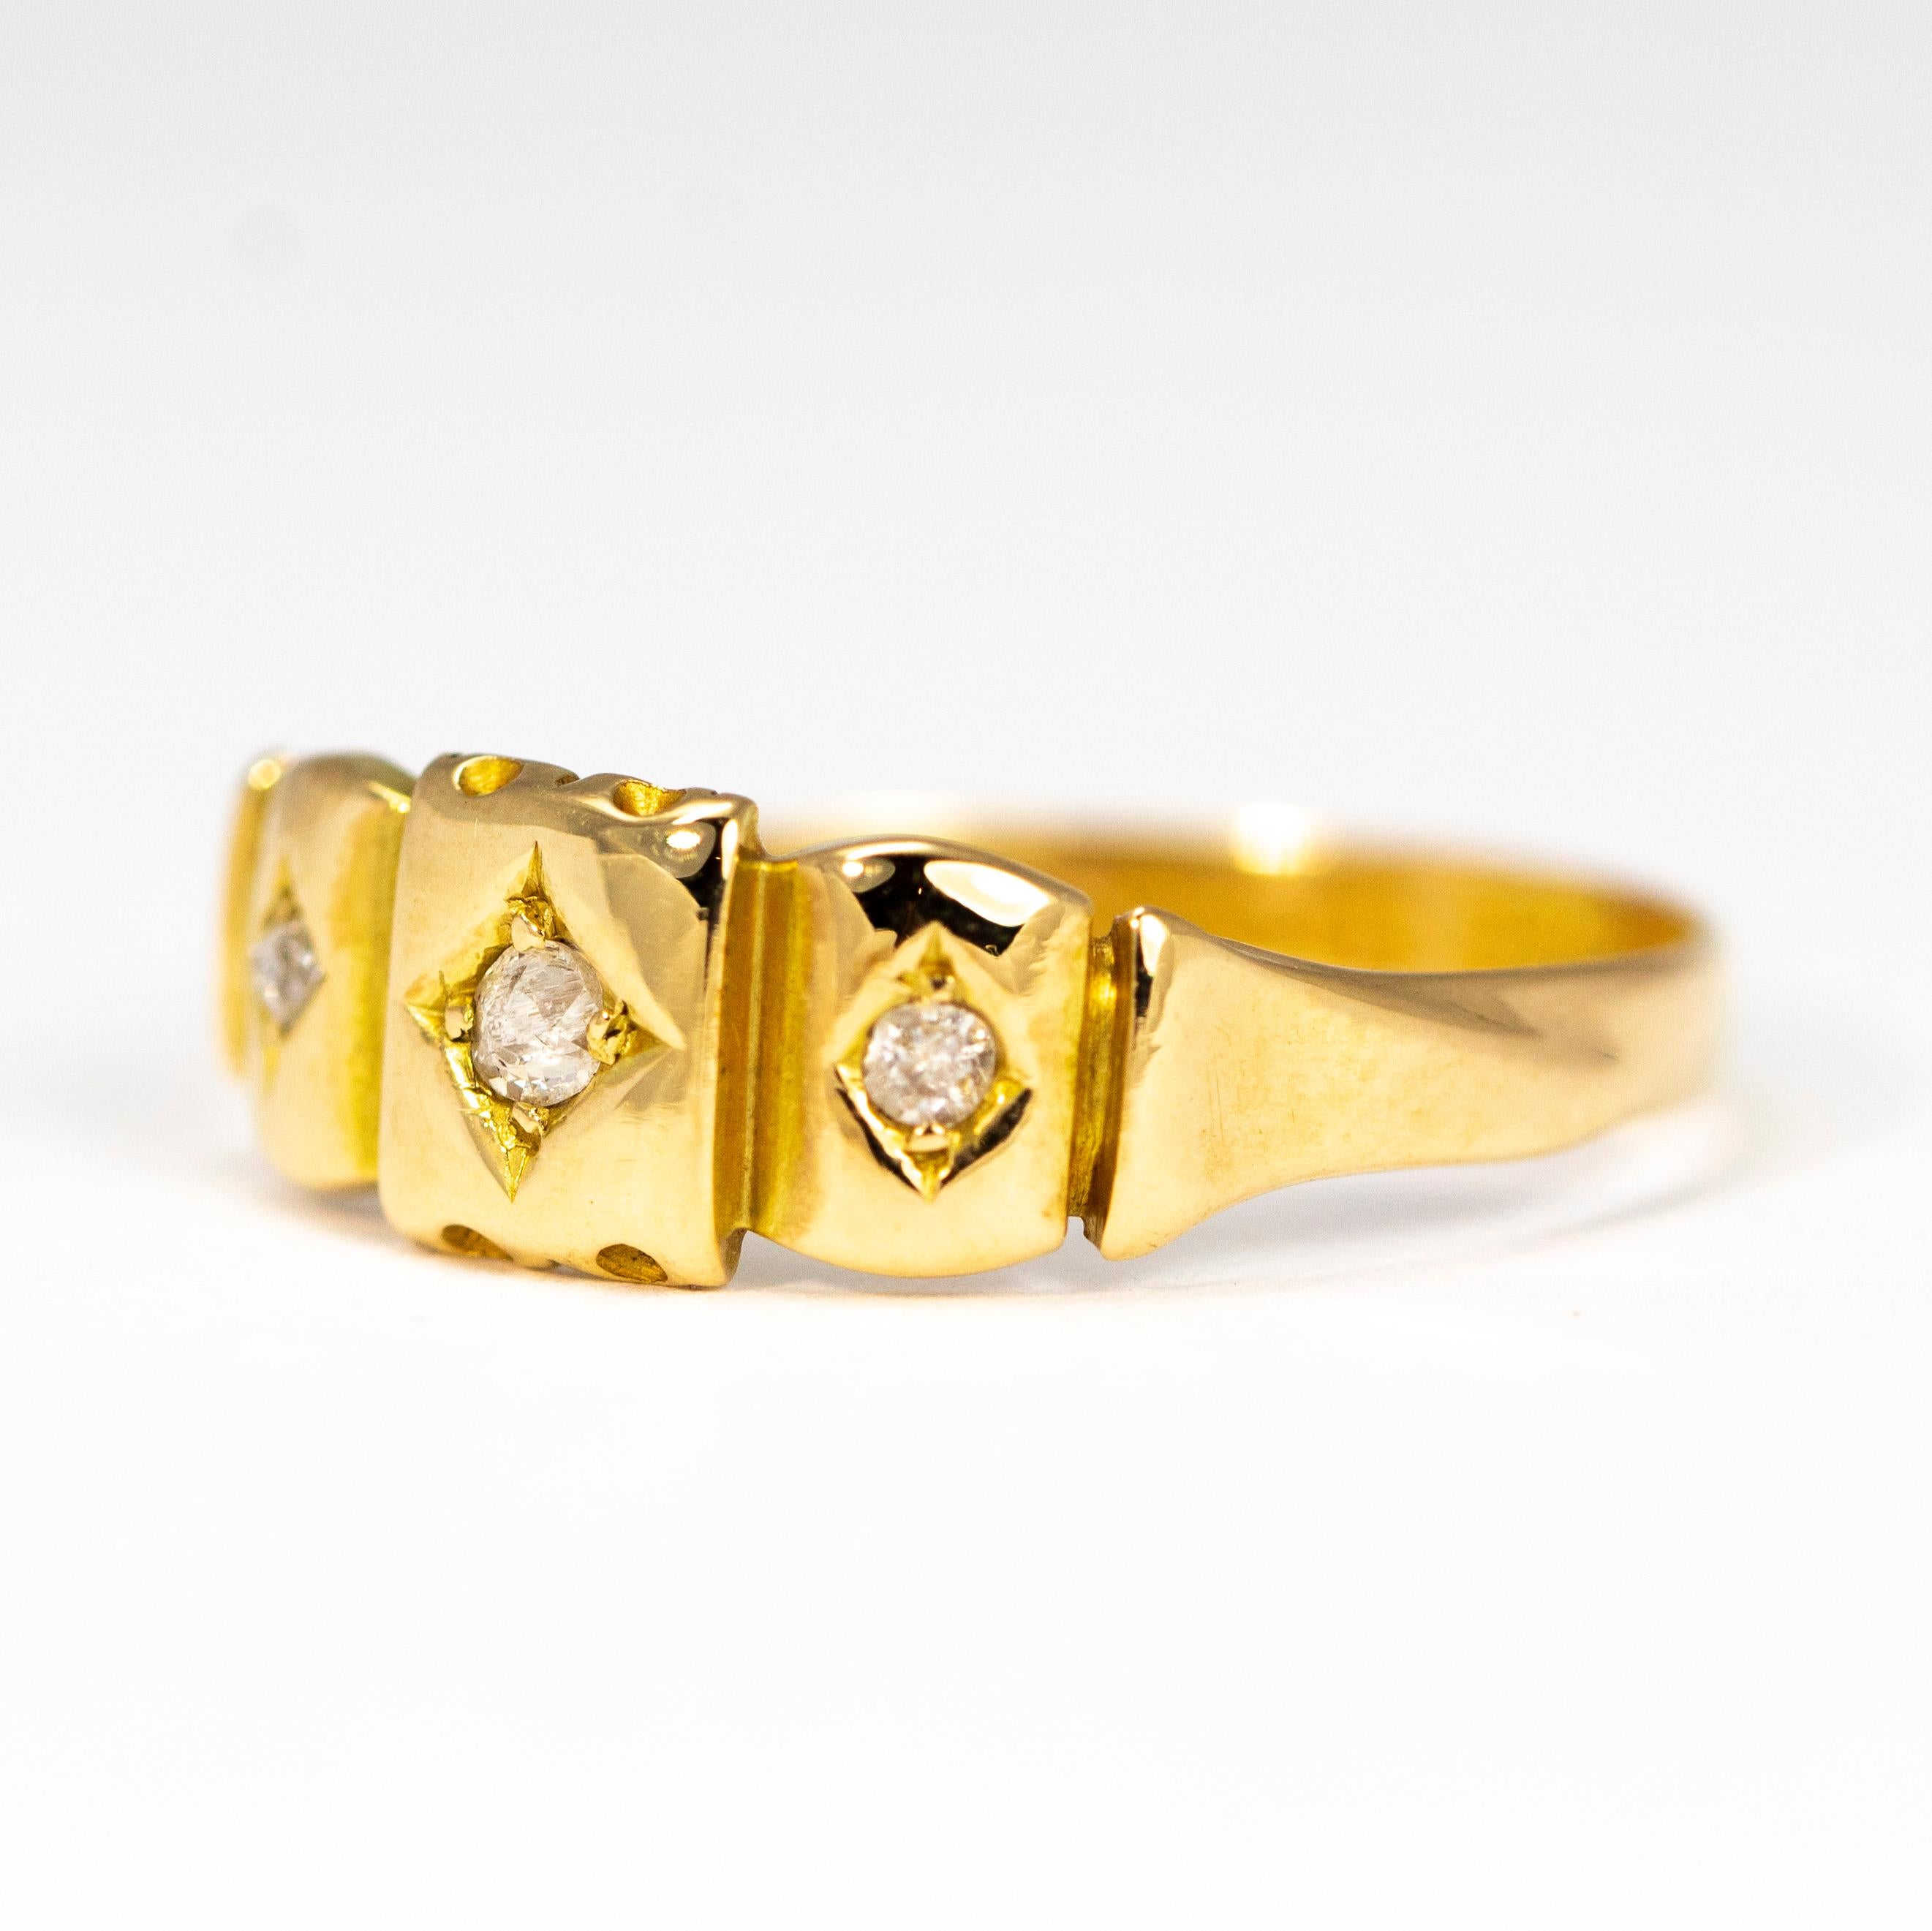 The central diamond in this band measures 6pts and the slightly smaller outer stones measure 4pts each. The stones are set in separate decorative panels of gold in diamond shaped settings. Made in Chester, England. 

Ring Size: O 1/2 or 8 1/4
Band